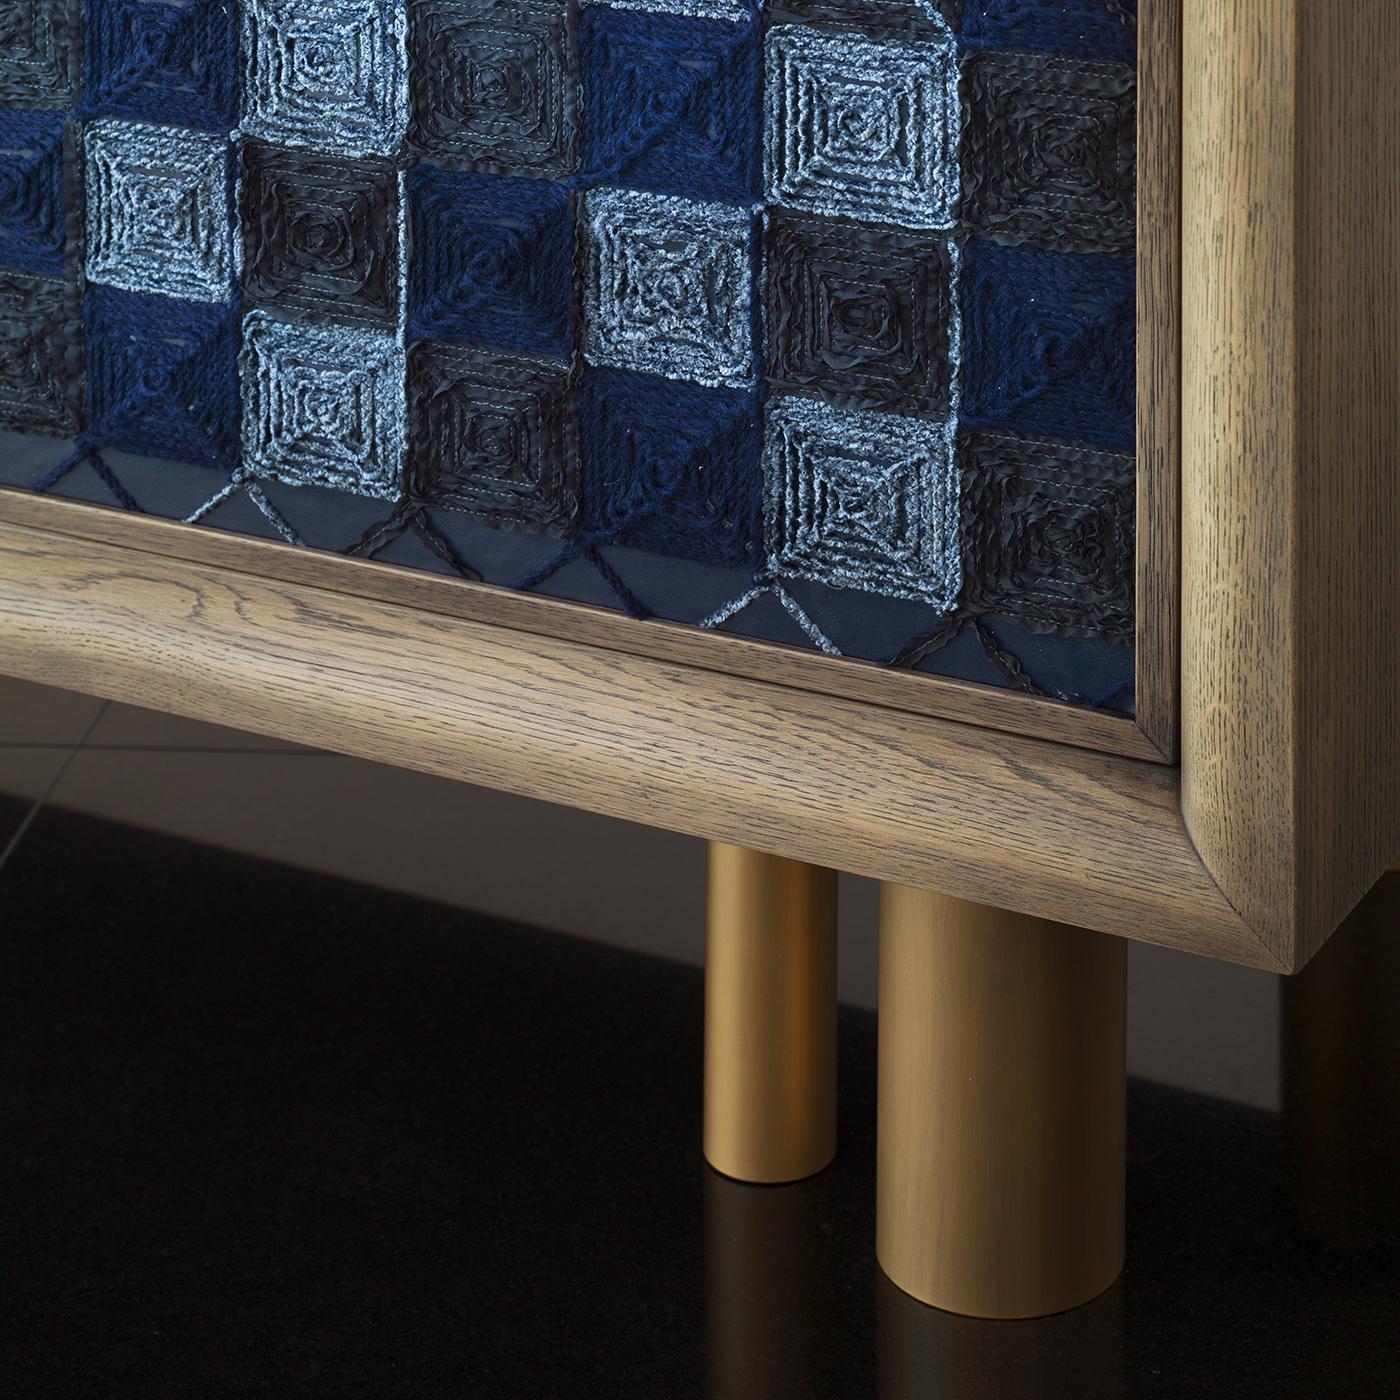 Handcrafted in oak, the Ivo blue cabinet stands proudly on six bronze legs and features a cool ash gray finish. In blue faux leather with checked embroidery, the cabinet opens to reveal three drawers and two glass shelves with a mirrored back for a